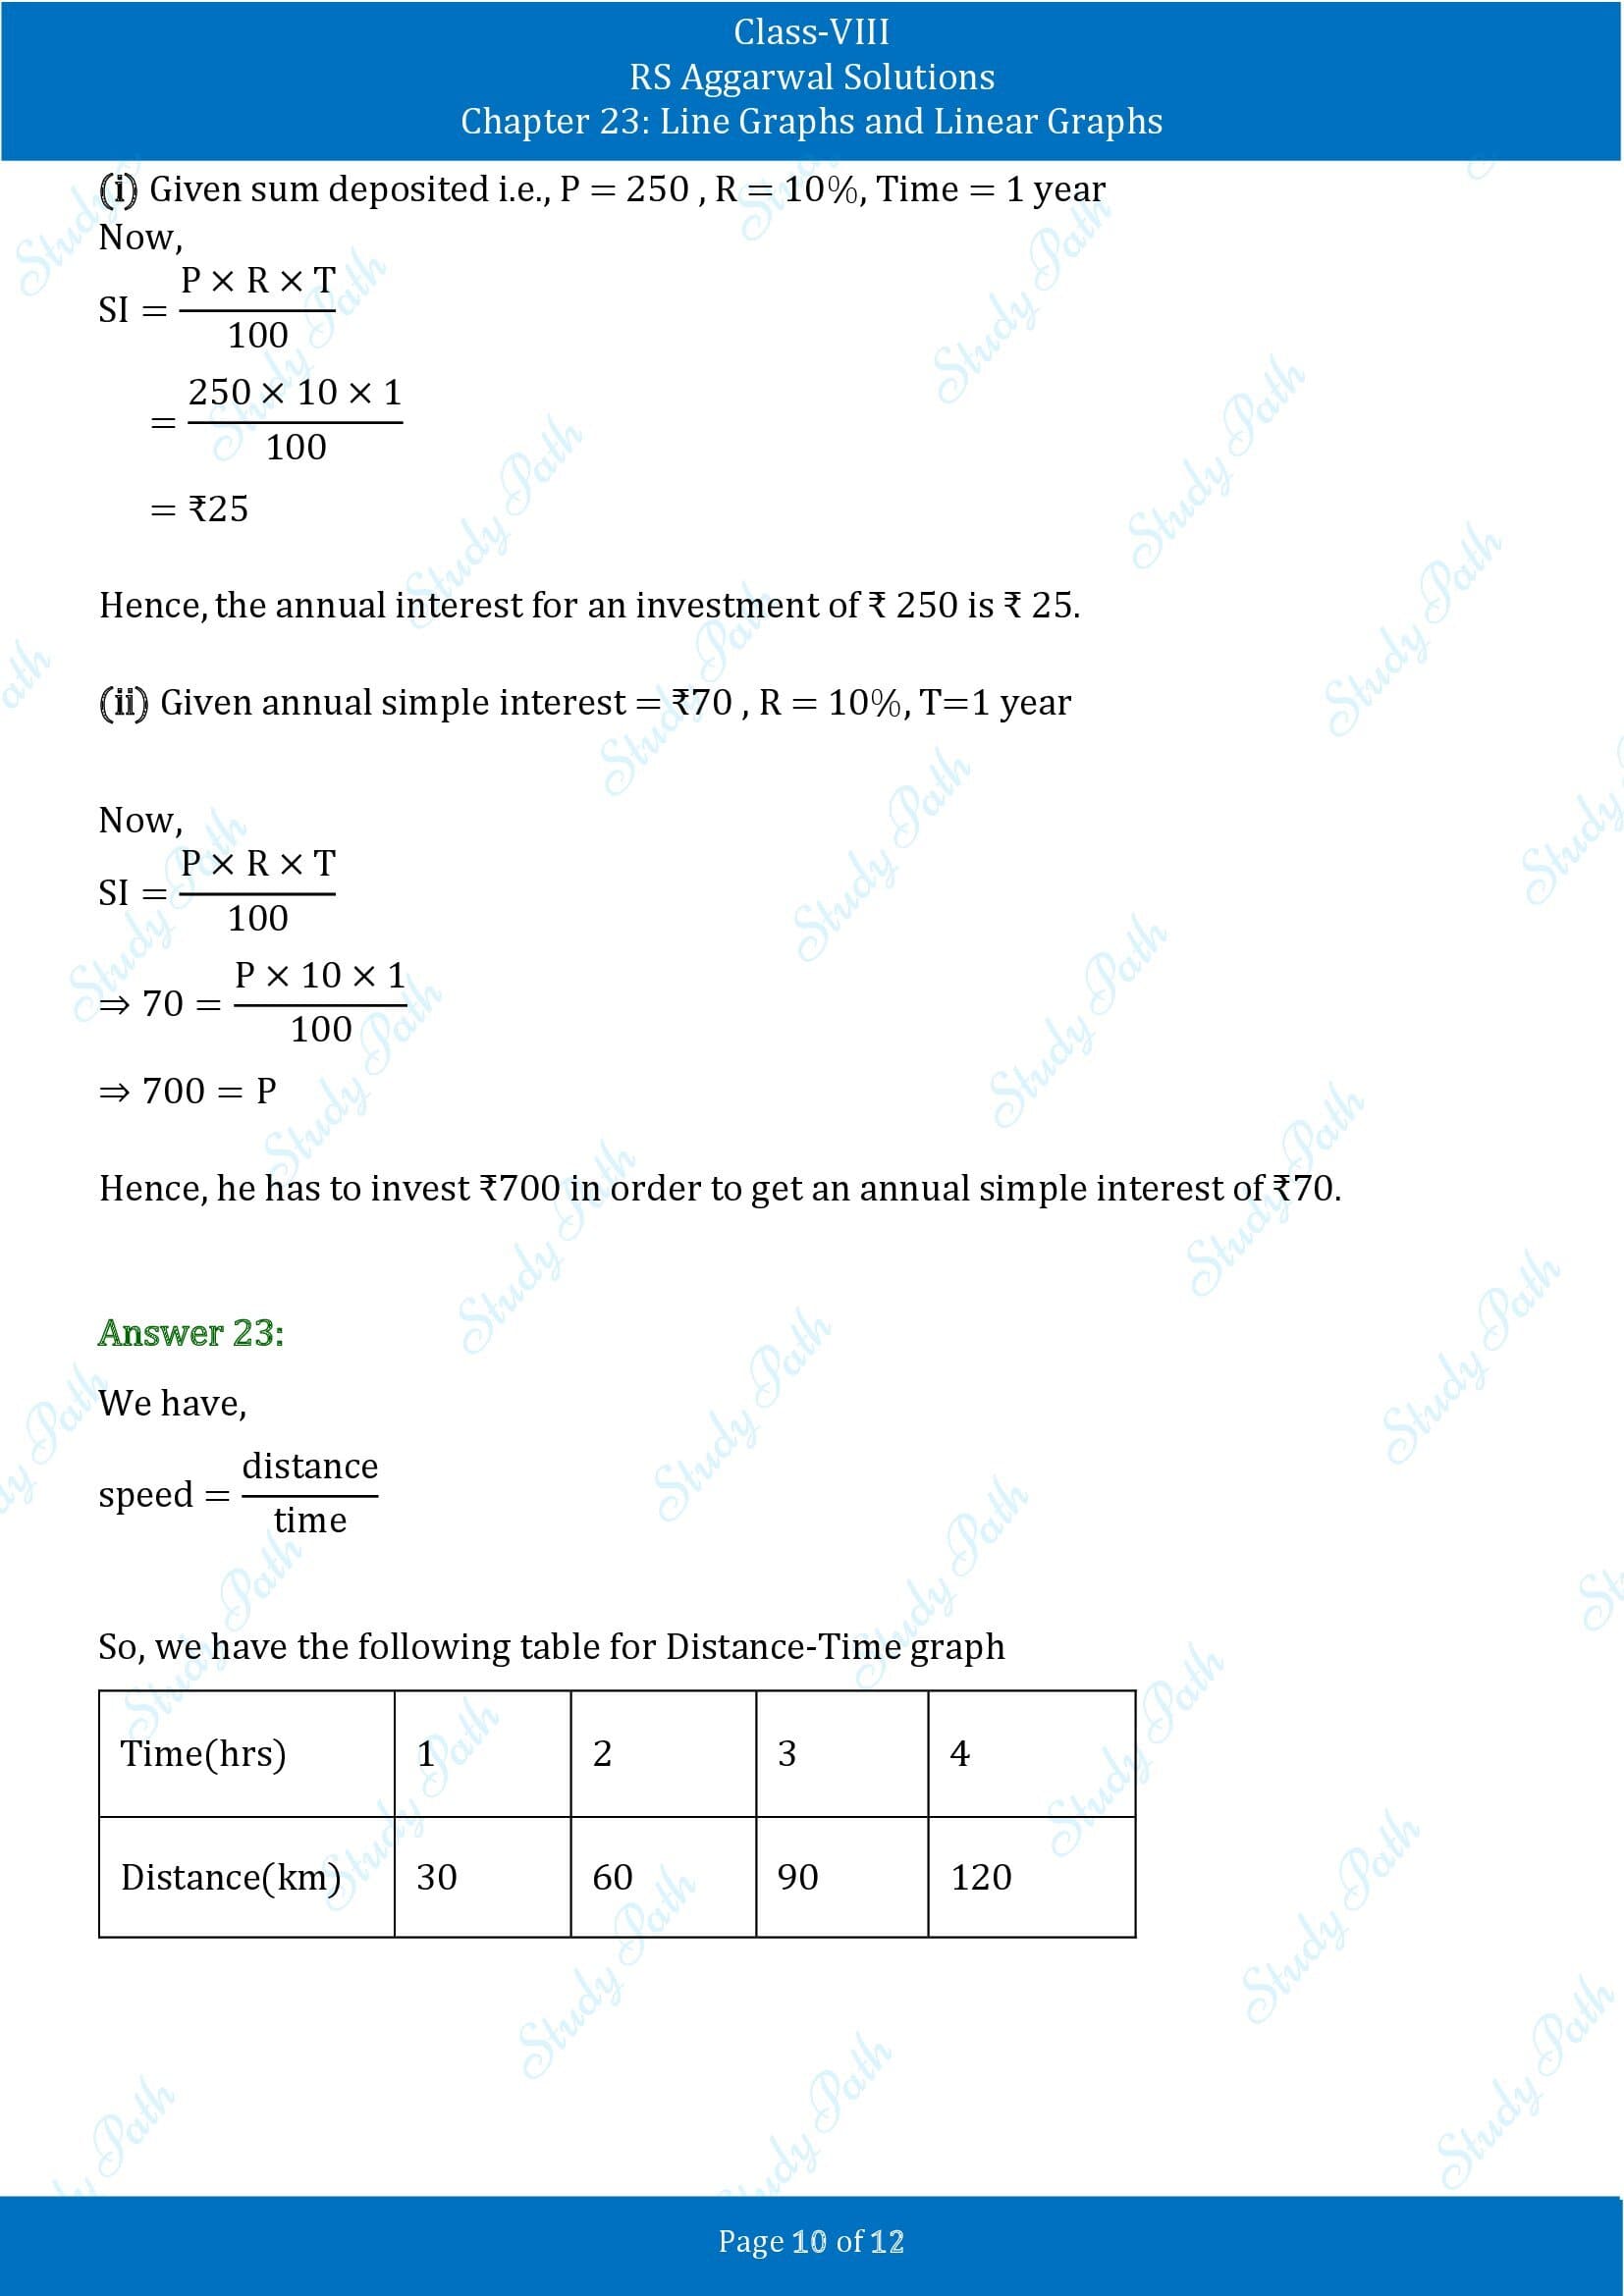 RS Aggarwal Solutions Class 8 Chapter 23 Line Graphs and Linear Graphs Exercise 23 00010